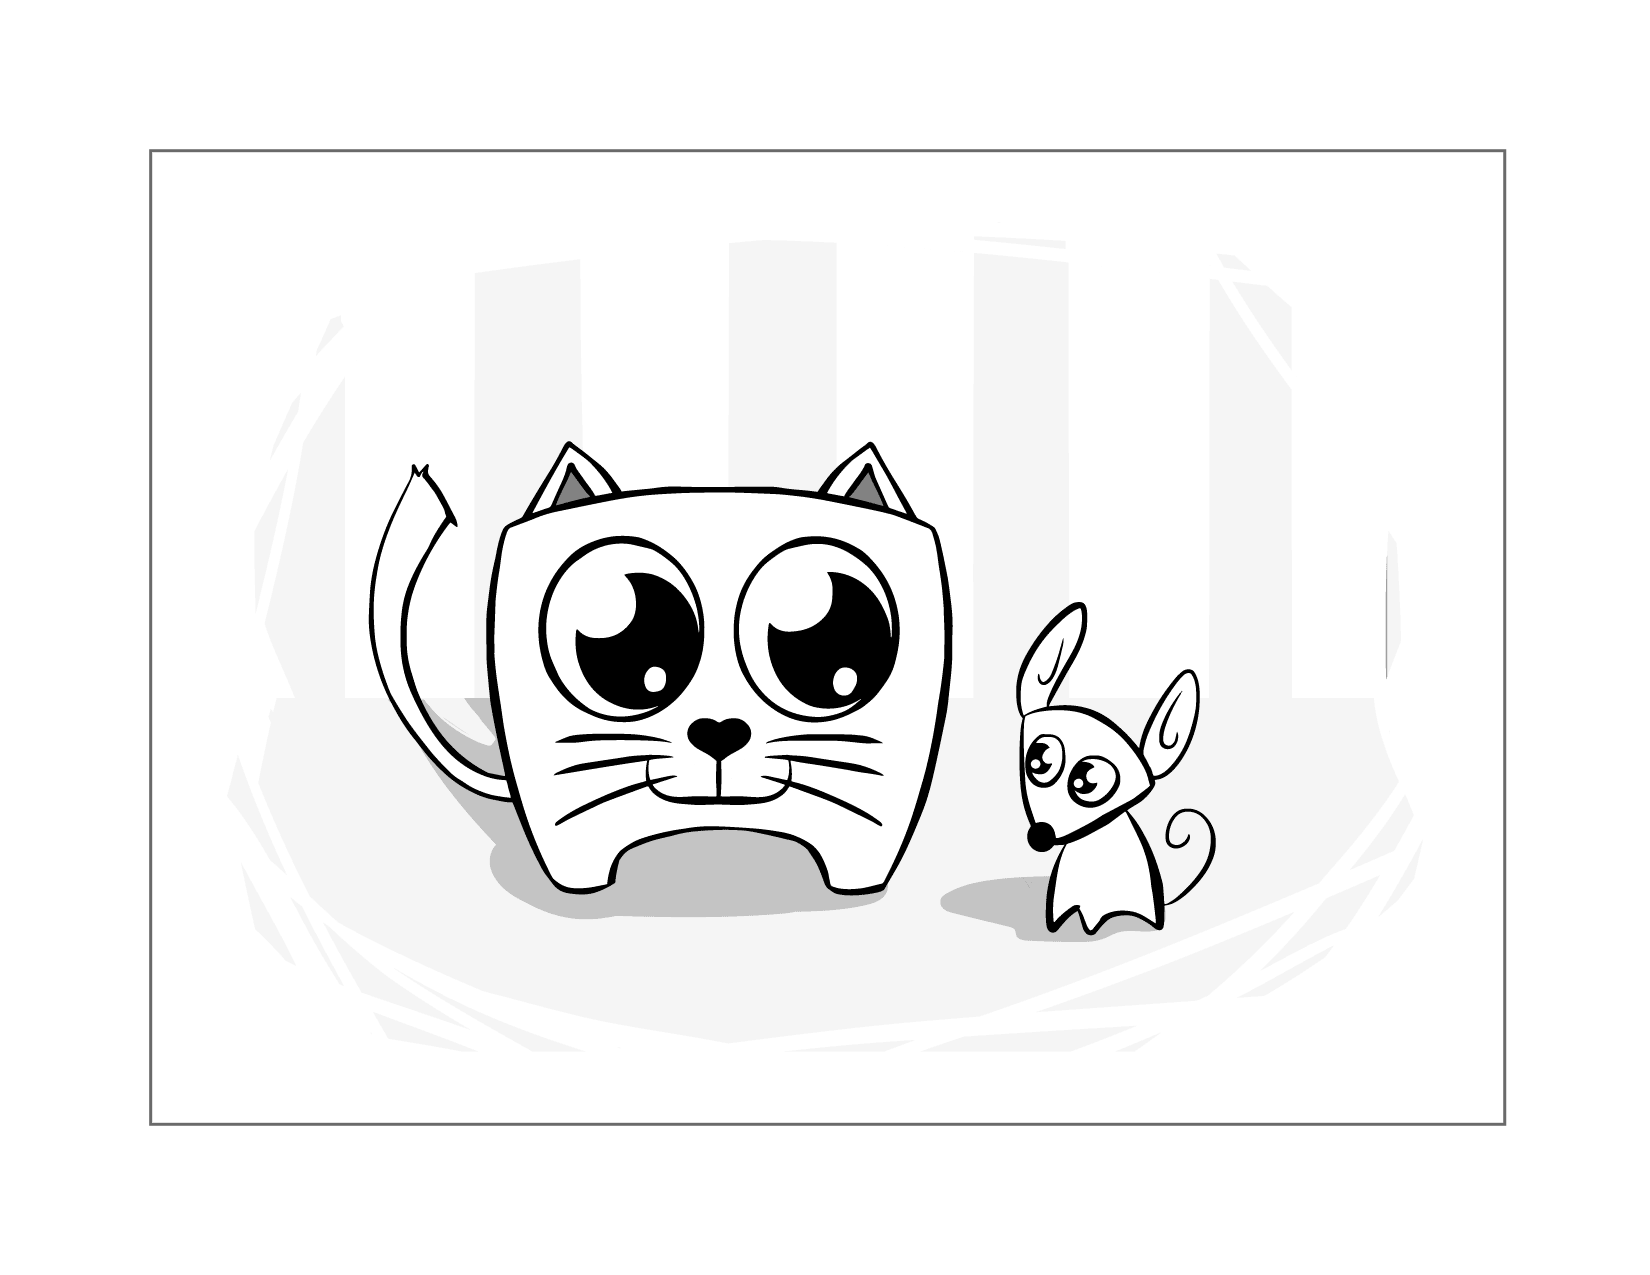 Cat And Mouse Coloring Page